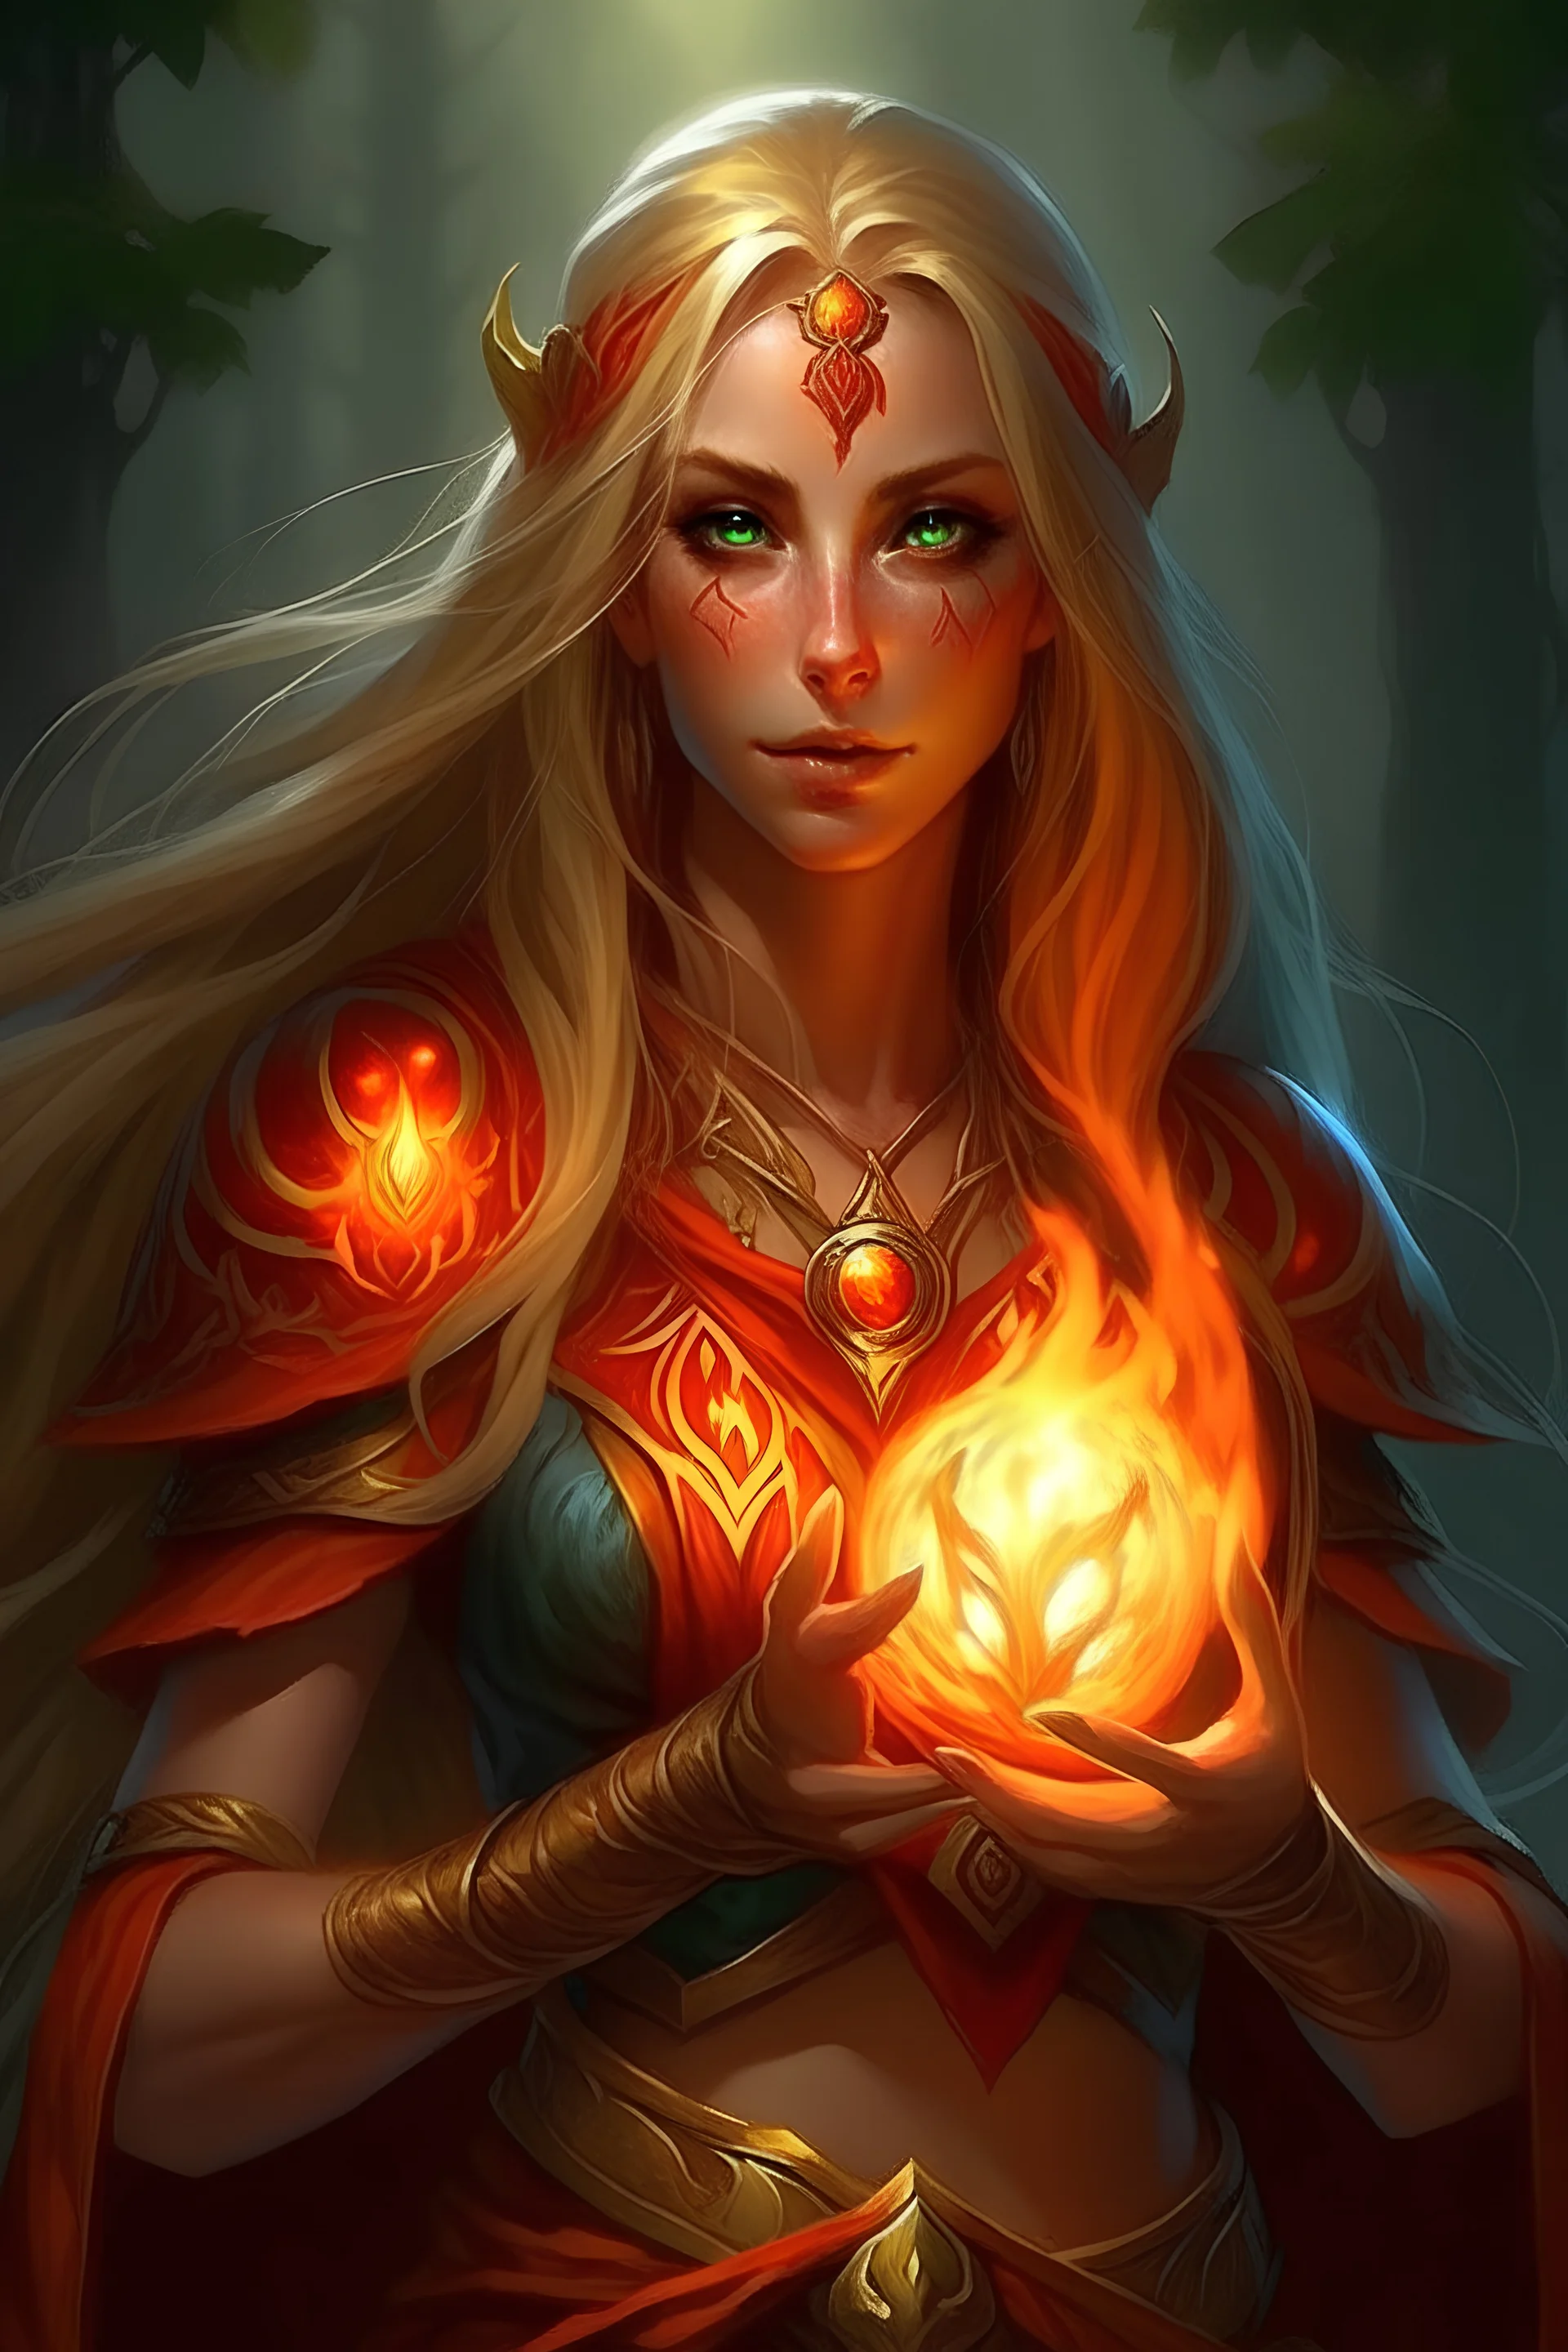 Female eladrin druid with fire abilities. long light hair made from fire. Tanned skin. Big red eyes with touch of fire .